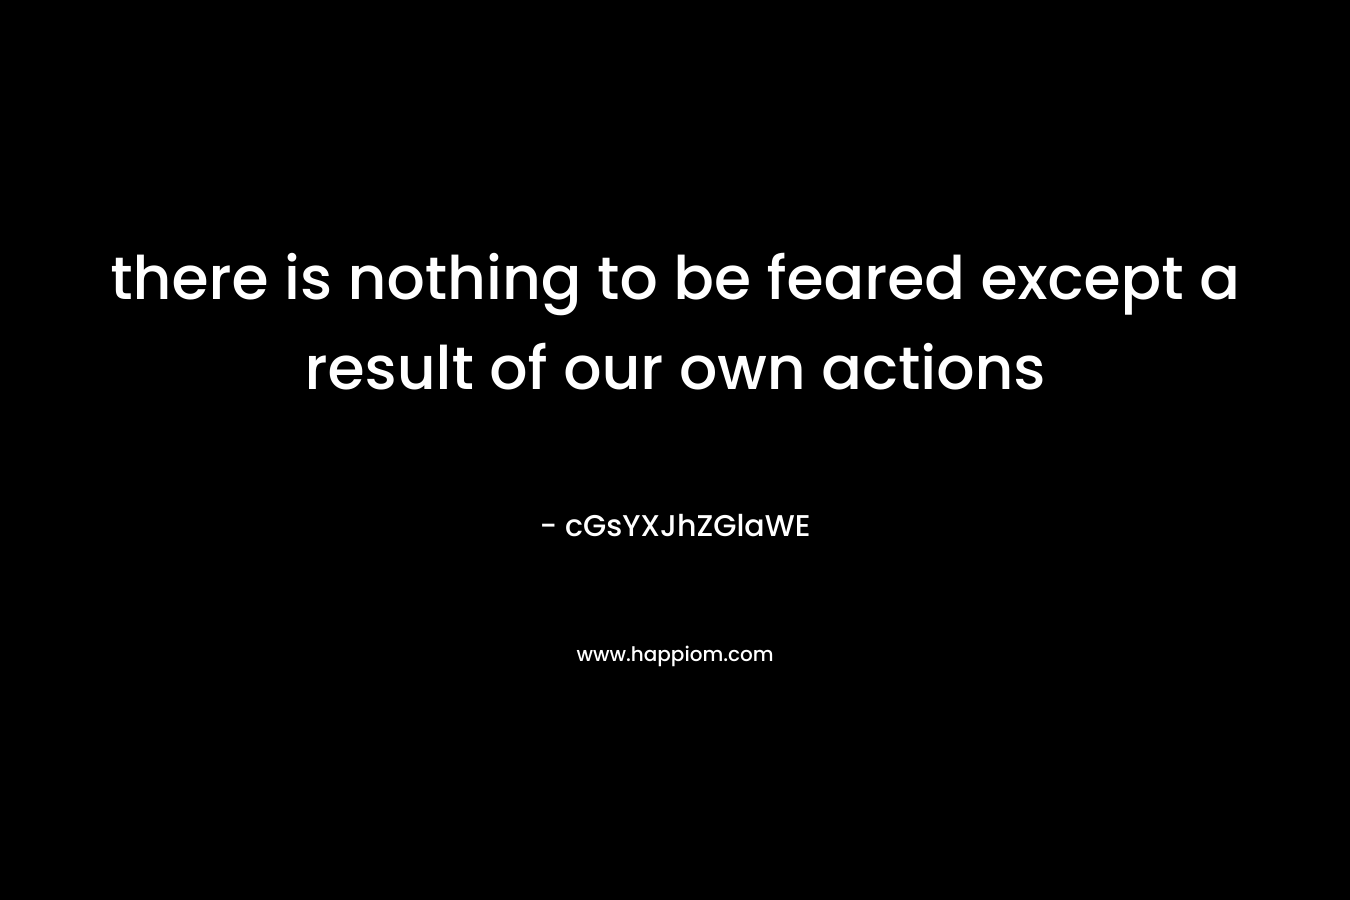 there is nothing to be feared except a result of our own actions